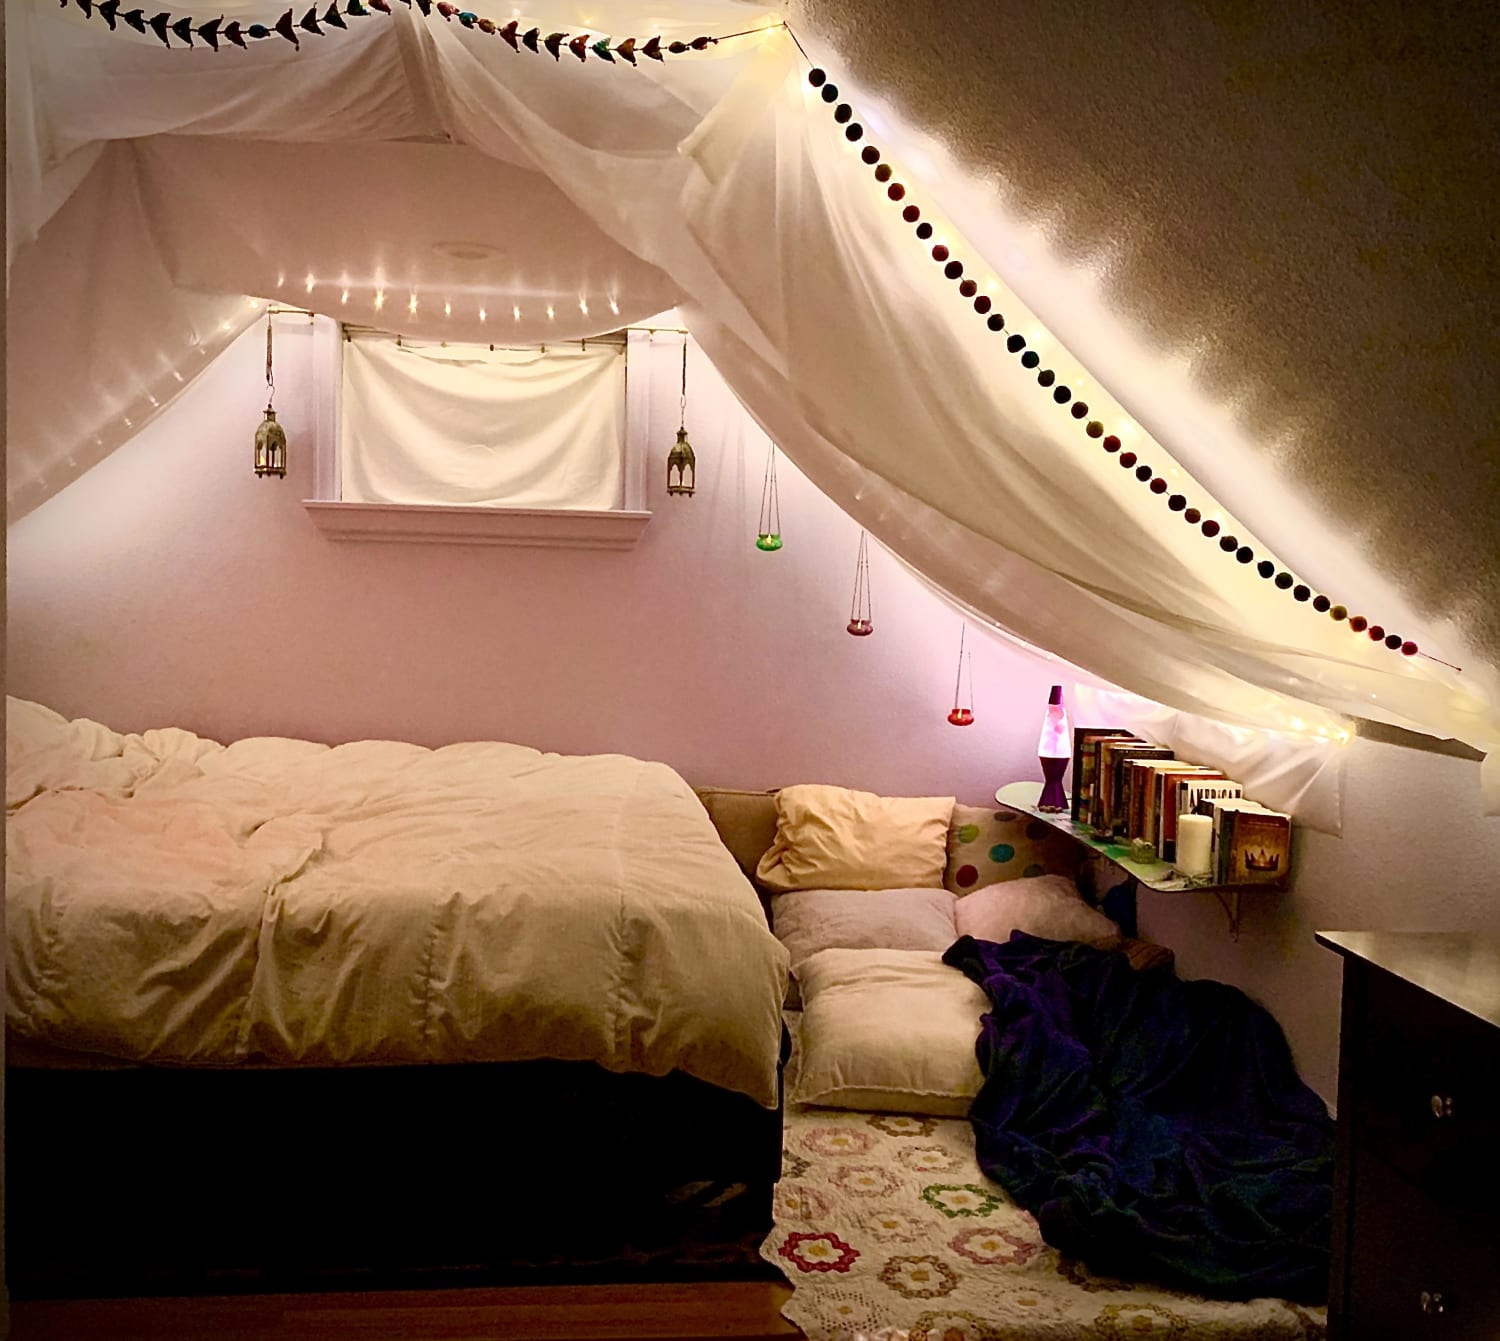 I’m a 49 year old woman living by myself for the first time in my life. I know it looks like a teen girl’s bedroom but it’s my safe place and I love it.